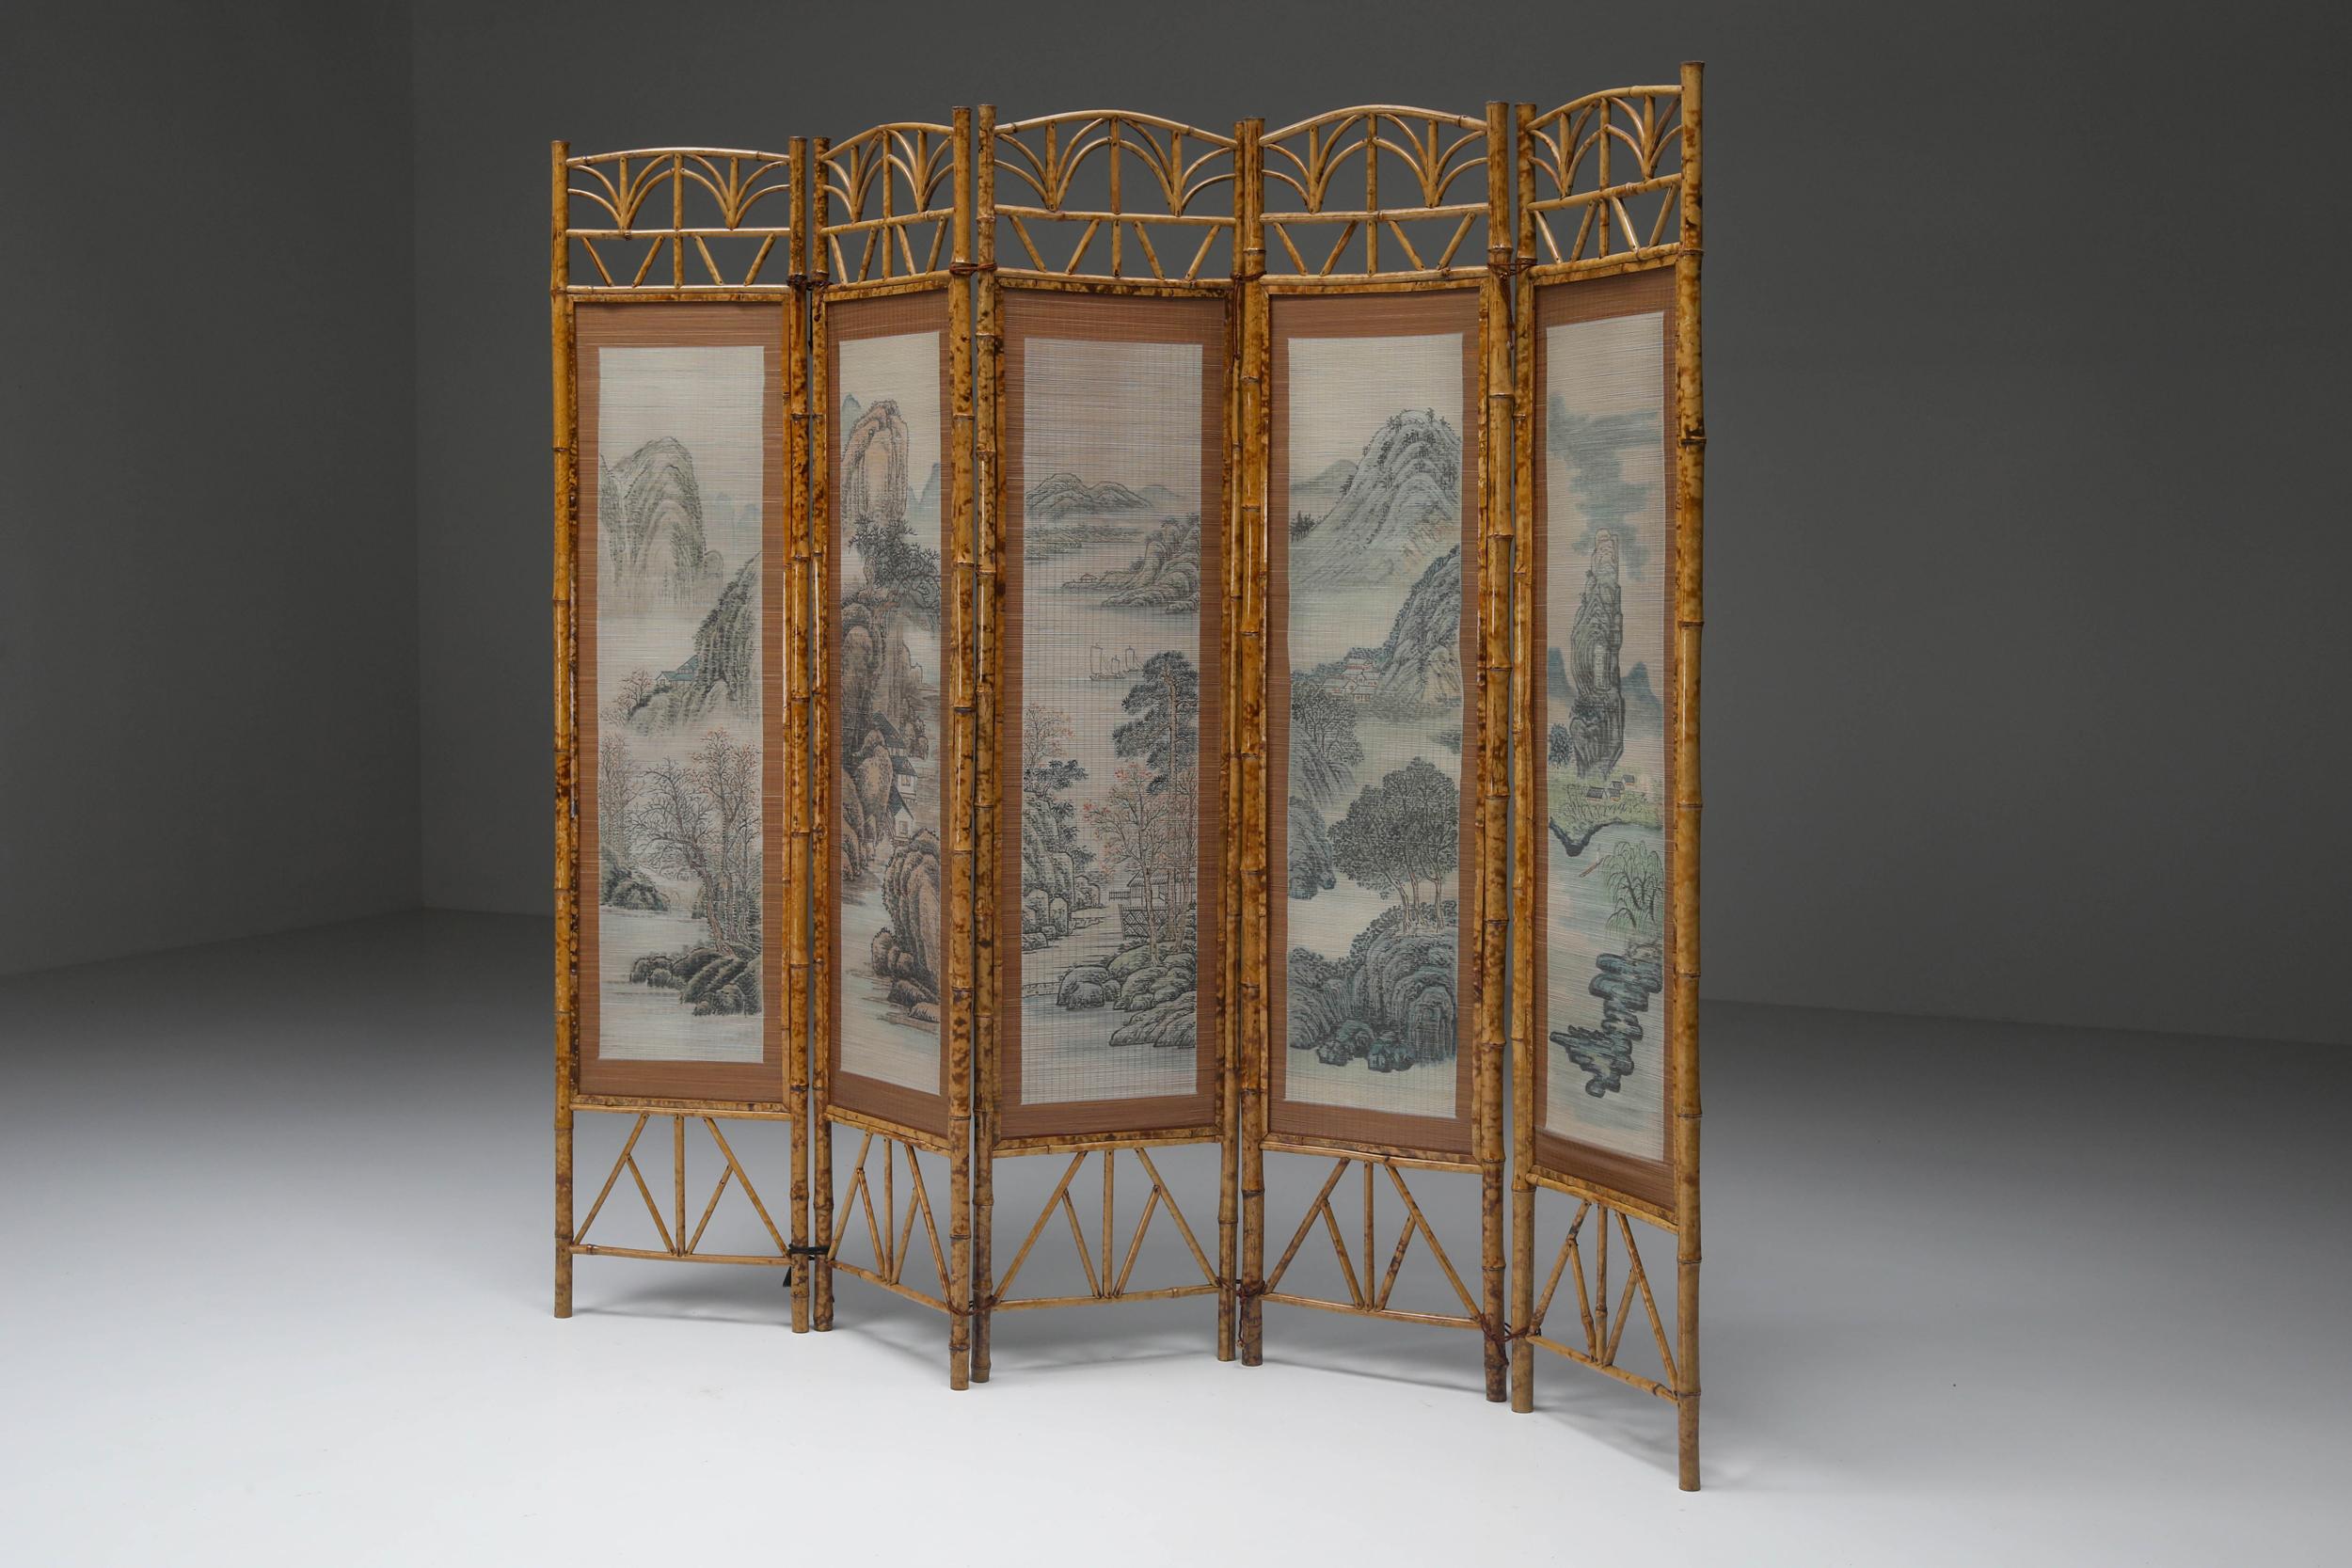 Oriental; Bamboo; Fabric; Room Divider; Boho chic; Mid-century modern, 1960's; 

Mid-Century Modern tall three wall-panel bamboo wood room divider, screen, or partition. 
Bamboo in combination with an oriental landscape on fabric. Boho chic very